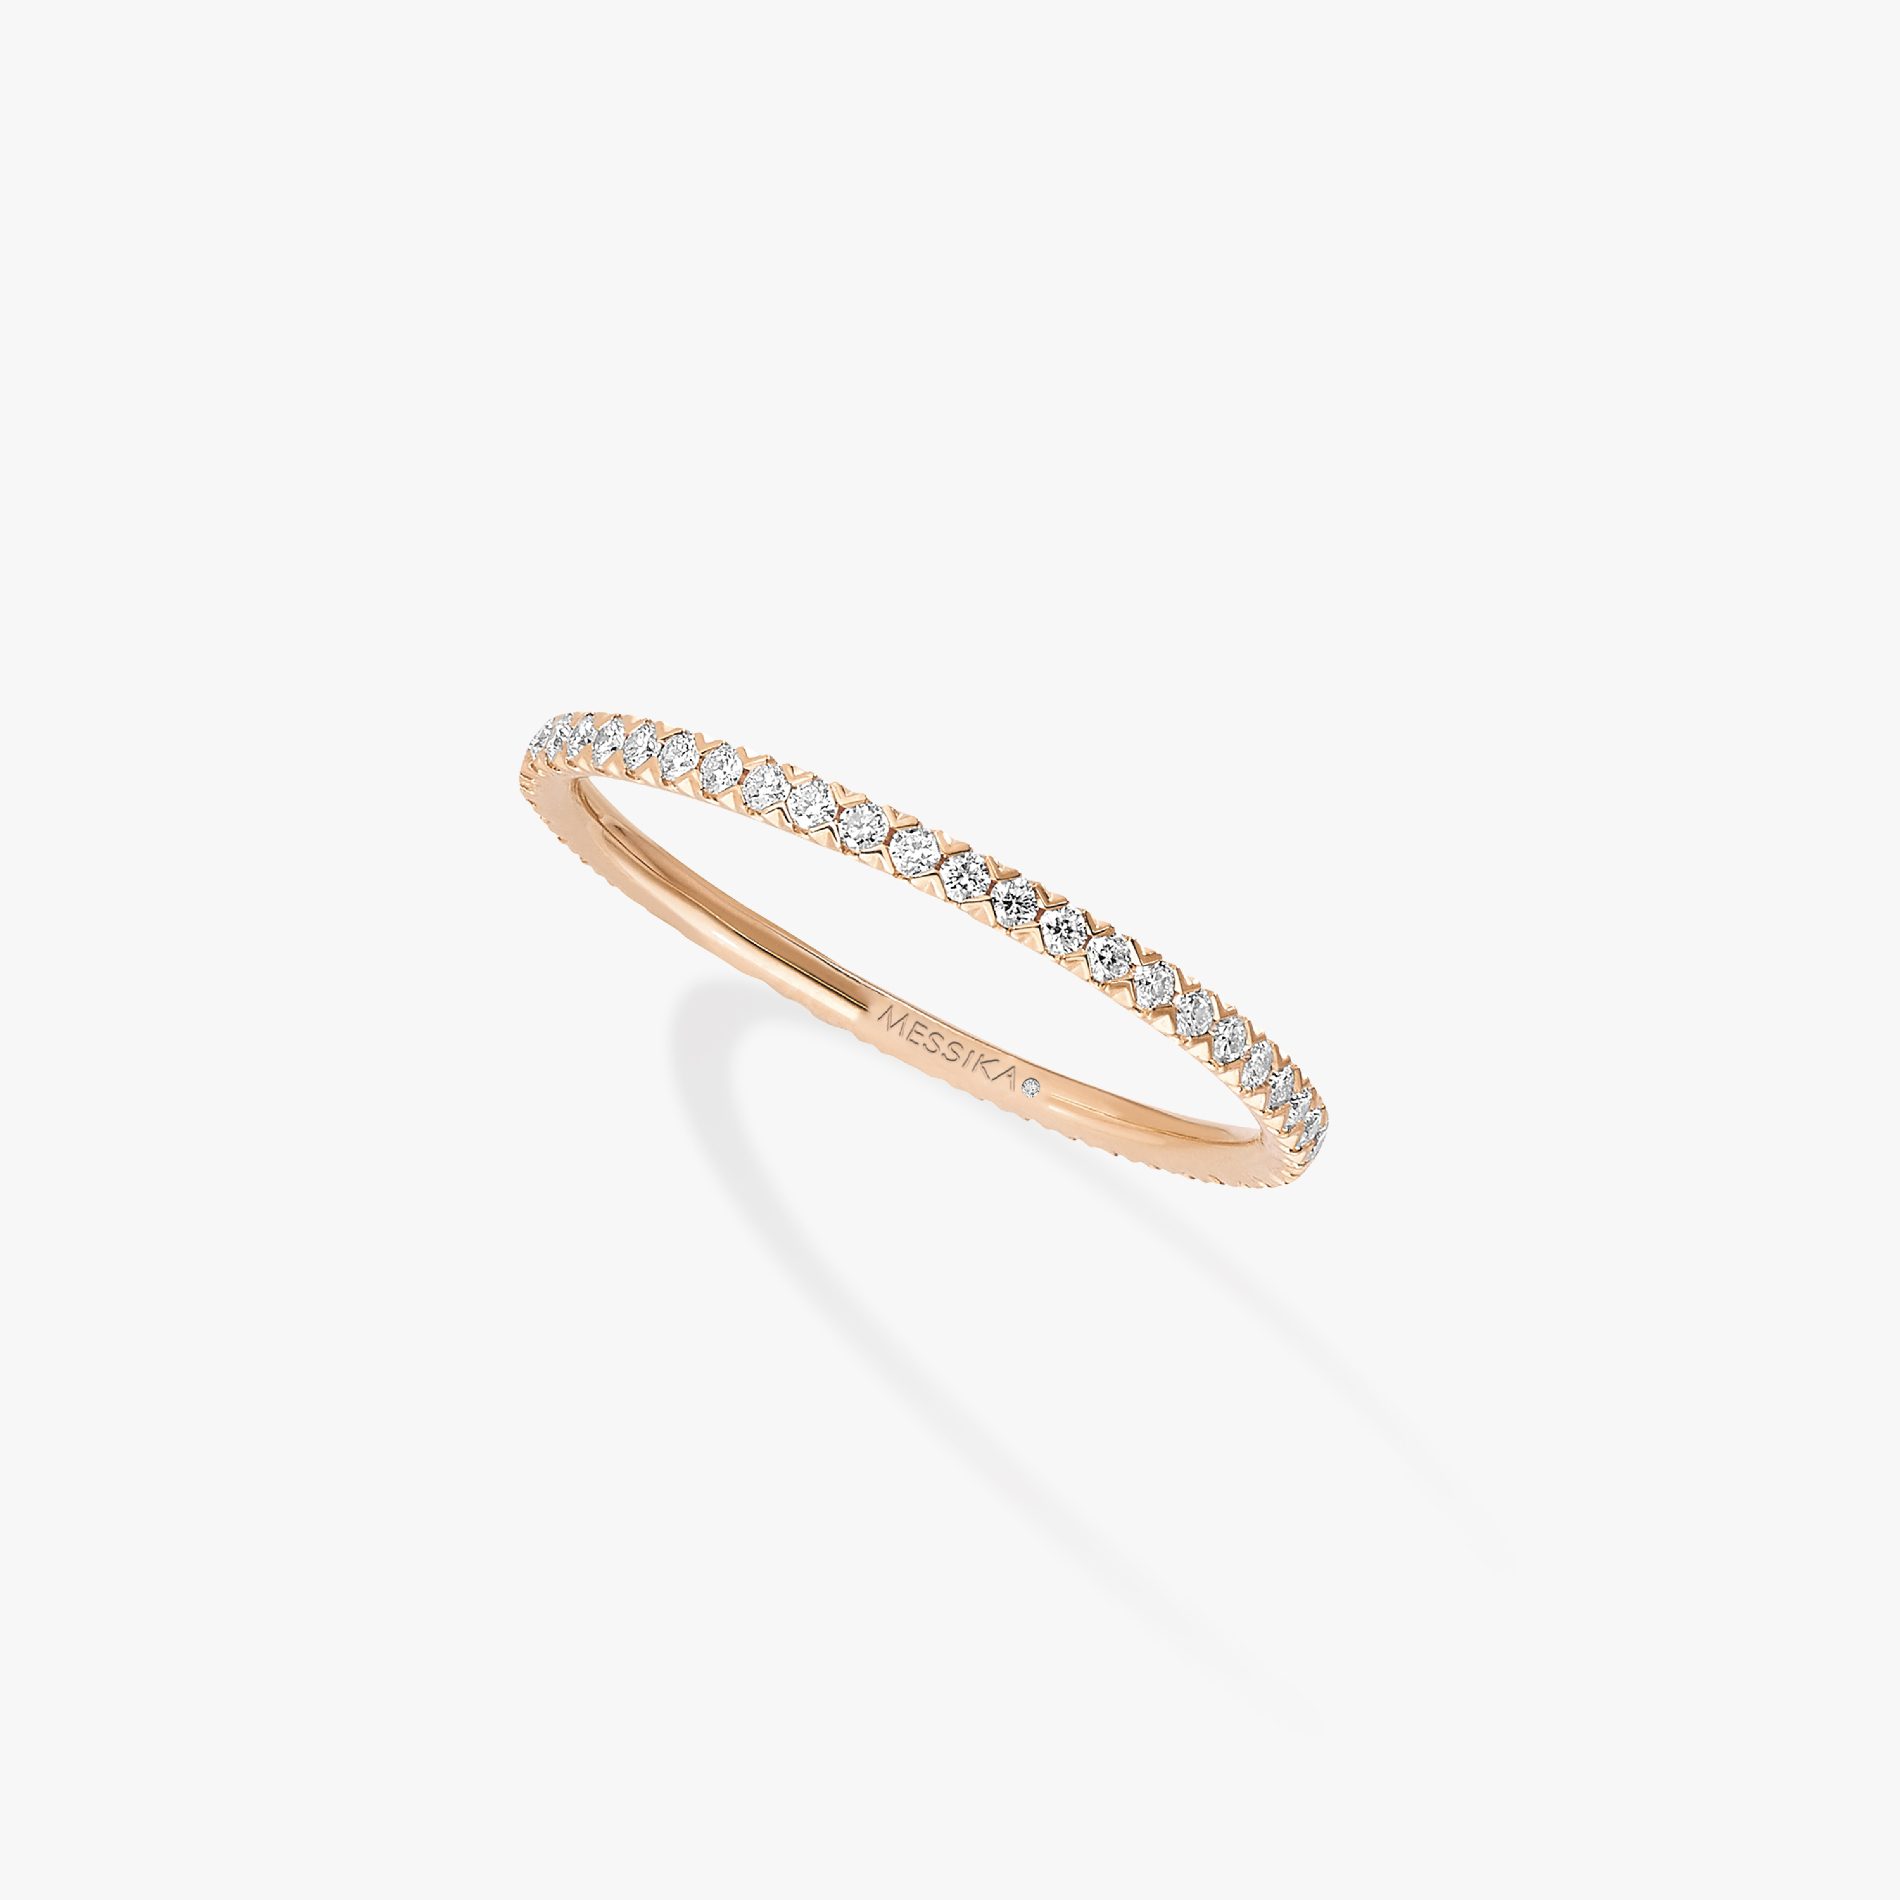 Gatsby Wedding Ring Pink Gold For Her Diamond Ring 04036-PG